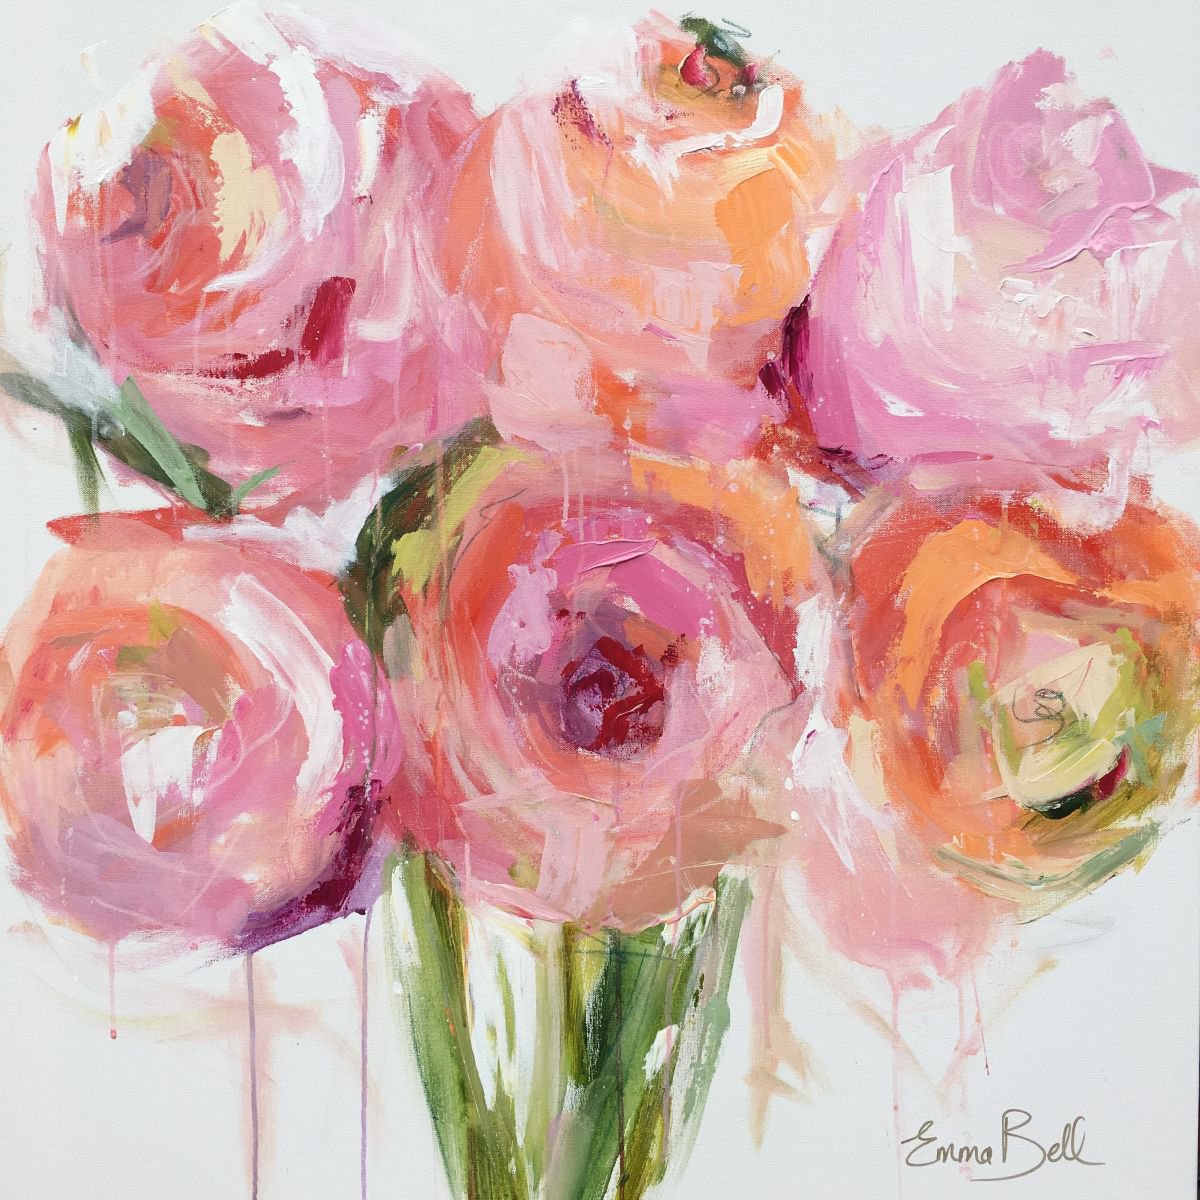 Pink Peonies by Emma Bell